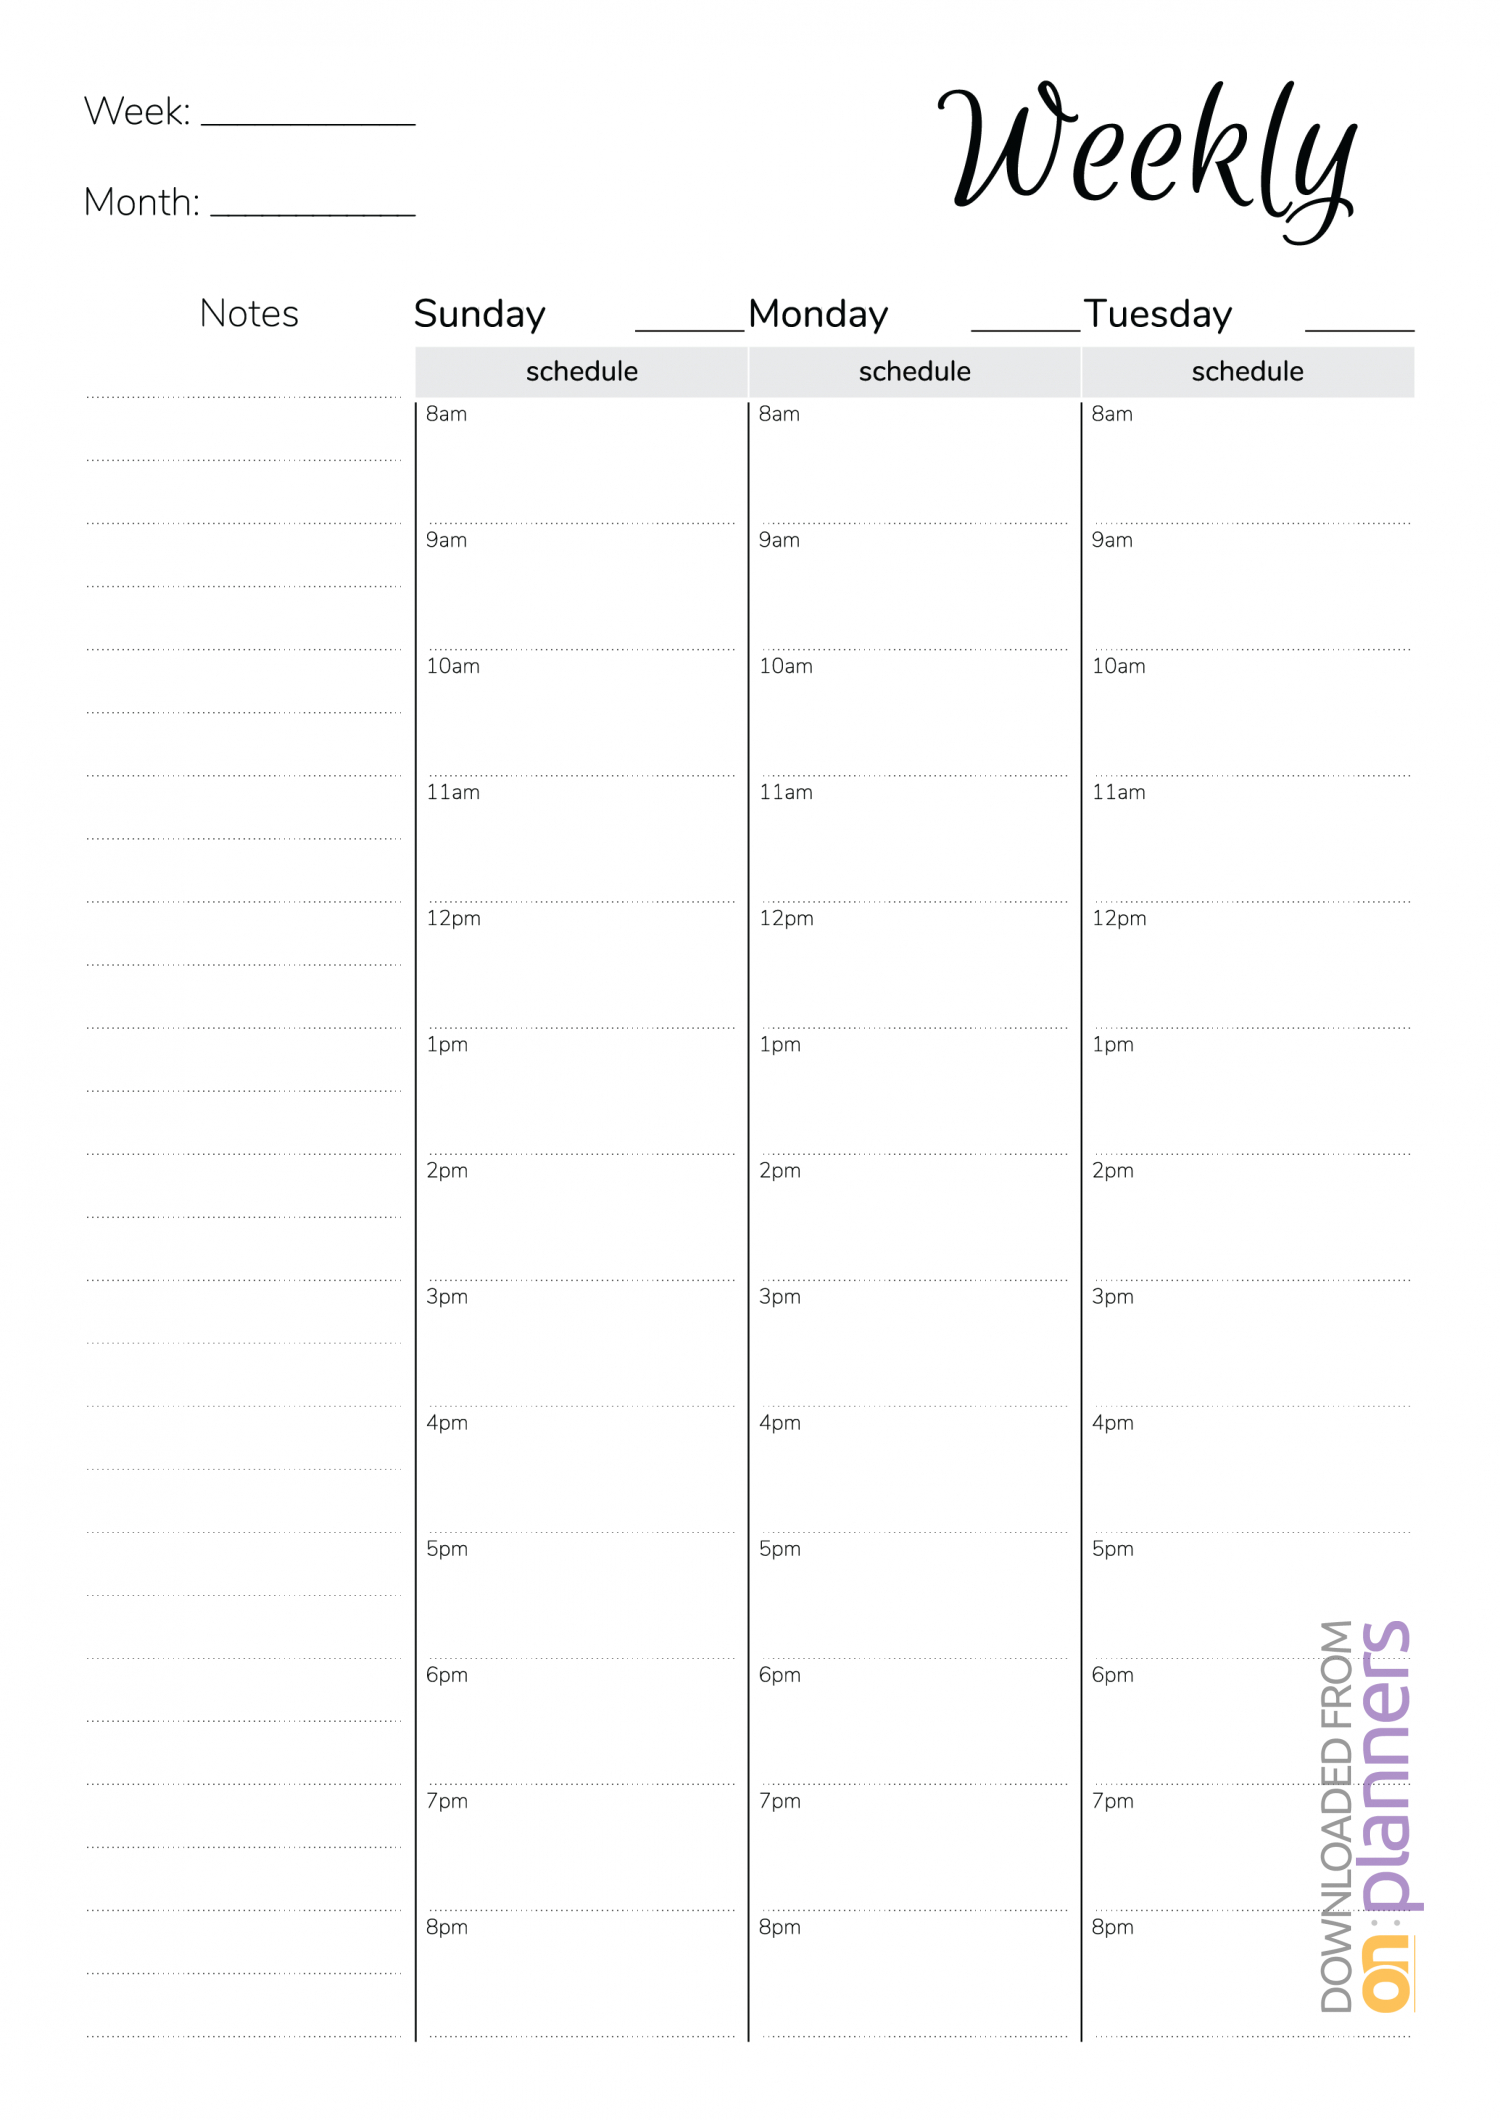 Download Printable Weekly Hourly Planner With Notes Section Pdf with Printable Hourly Schedule